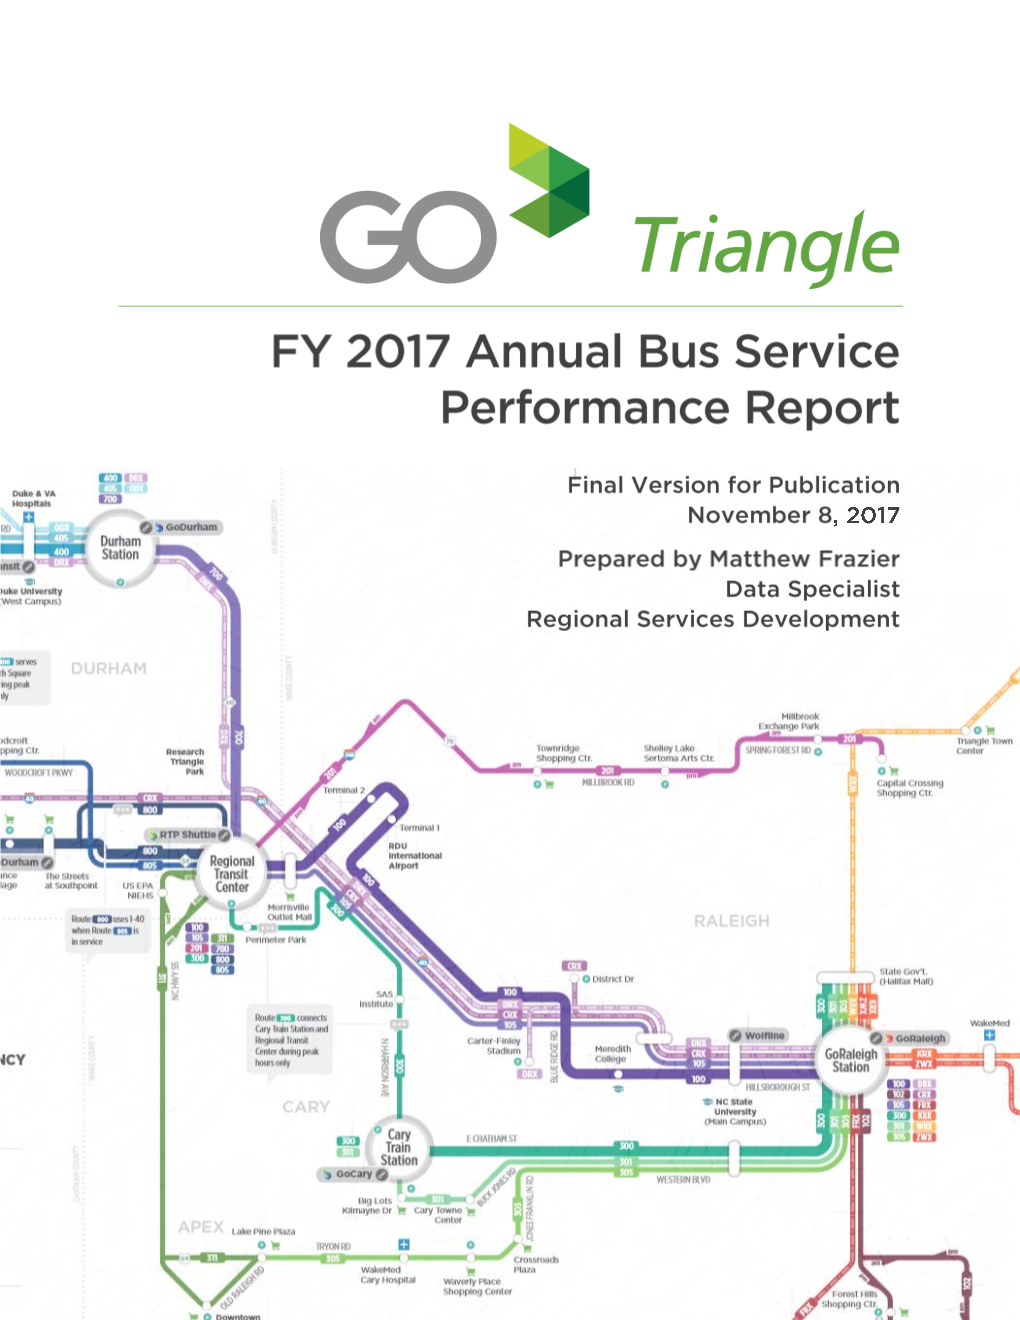 FY 2017, Gotriangle Had a Total of 1,662,758 Boardings